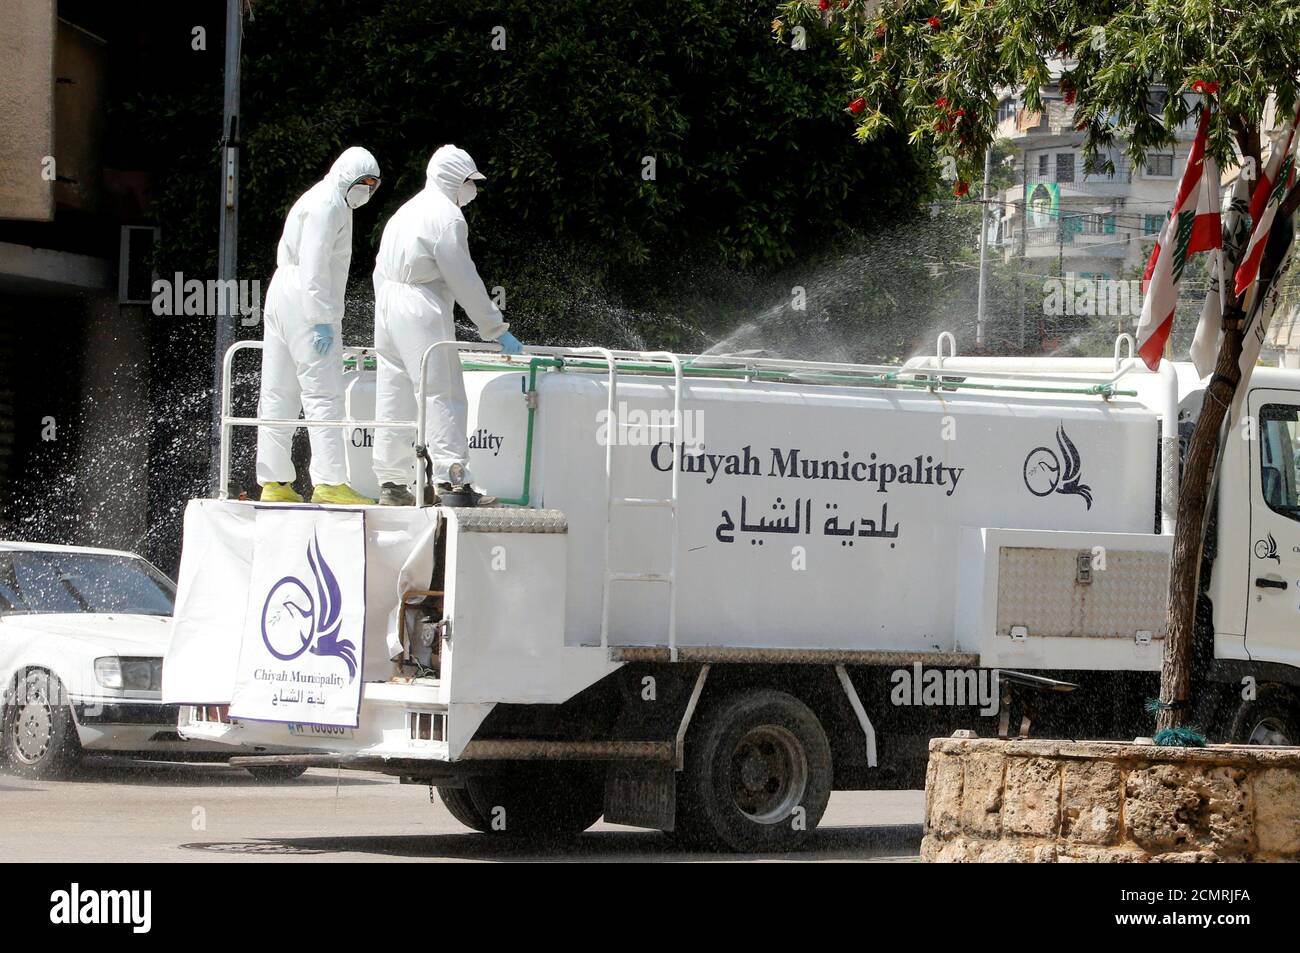 Workers of the municipality sanitize a street, as Lebanon is set to extend a countrywide lockdown by two weeks to combat the spread of coronavirus disease (COVID-19) in Ain el-Remmaneh, Lebanon March 26, 2020. REUTERS/Mohamed Azakir Stock Photo